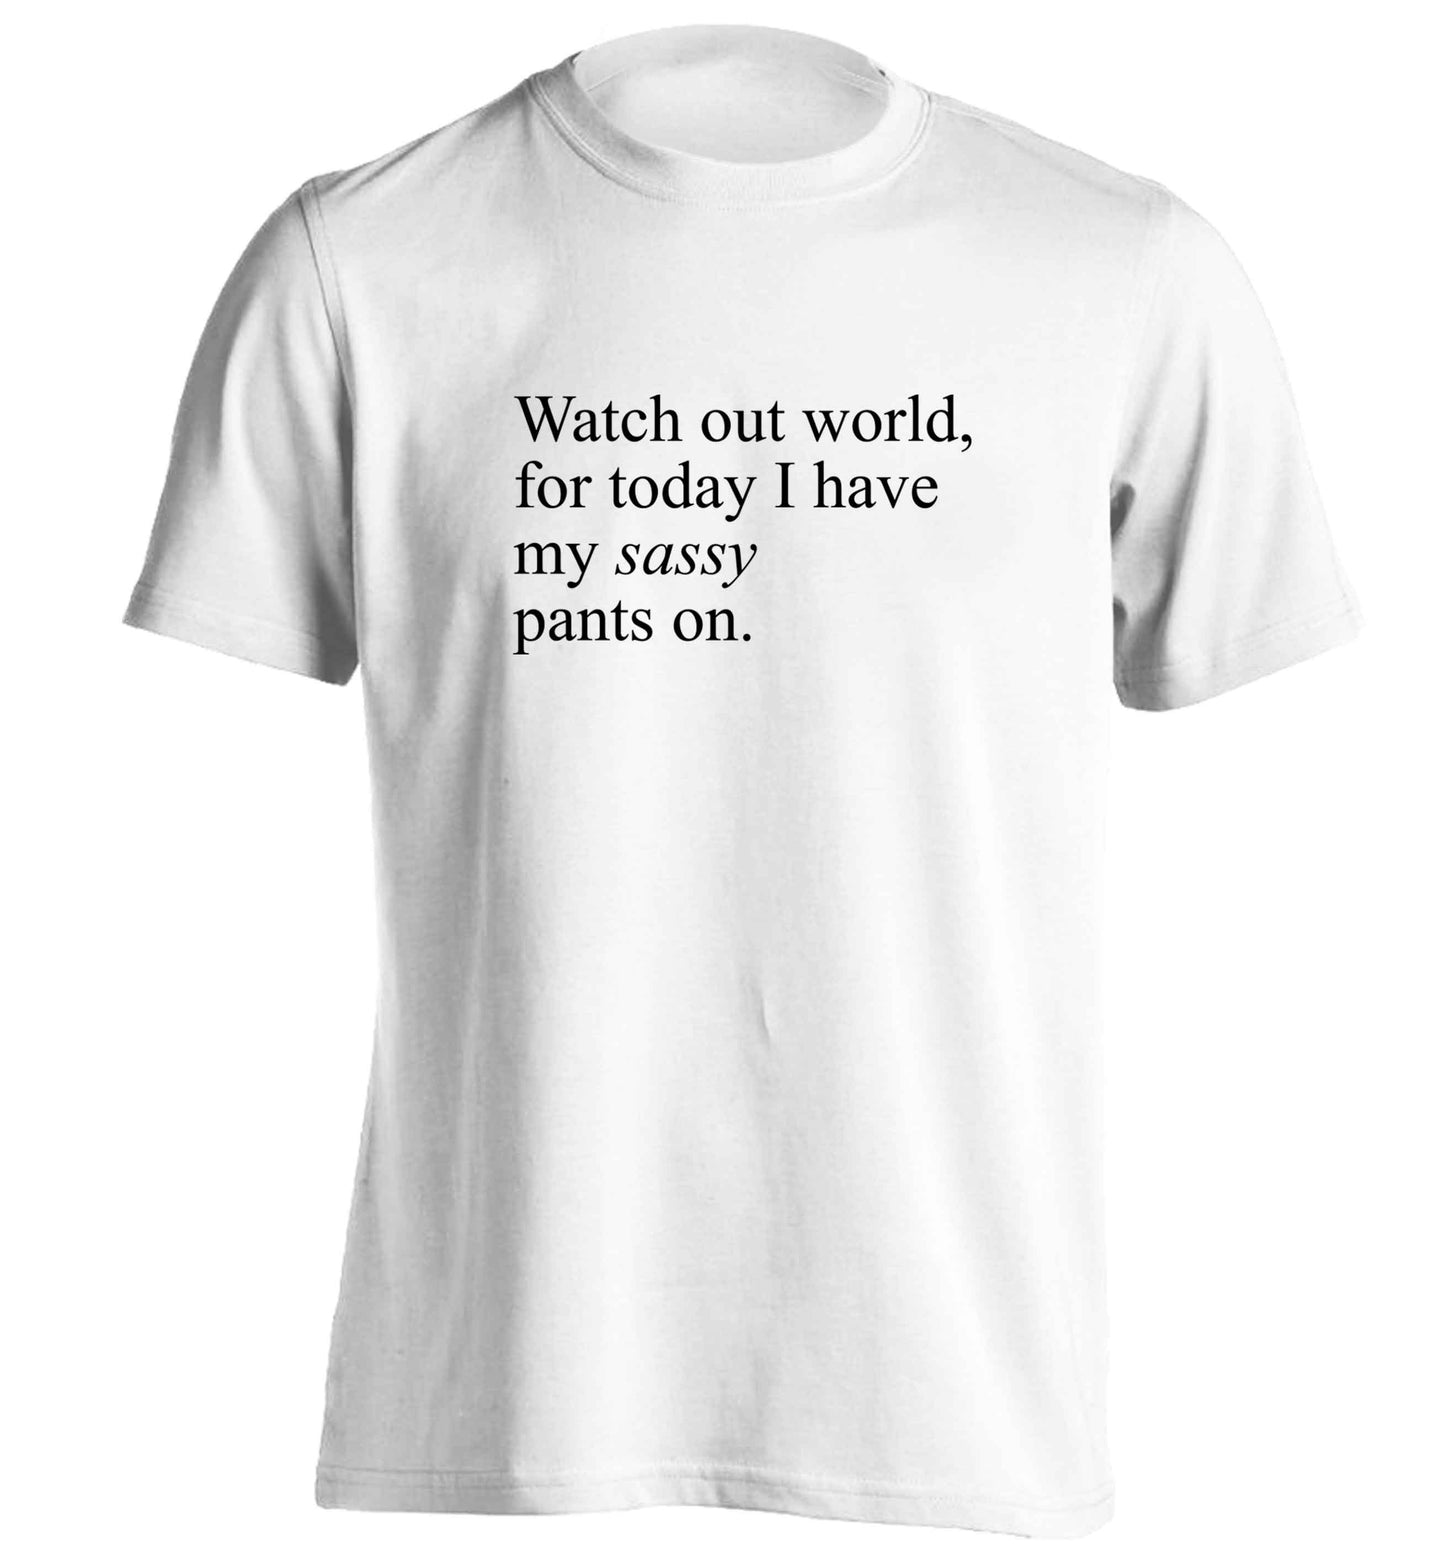 Watch out world for today I have my sassy pants on adults unisex white Tshirt 2XL